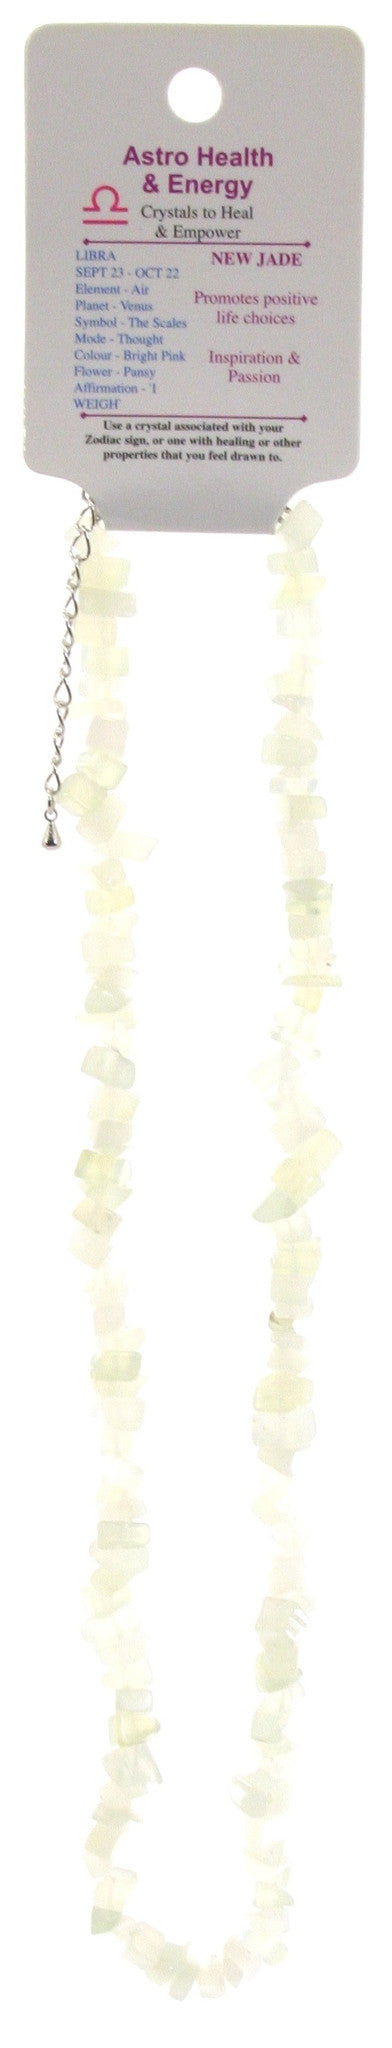 New Jade Crystal Chip Horoscope Necklace - Star Sign Libra